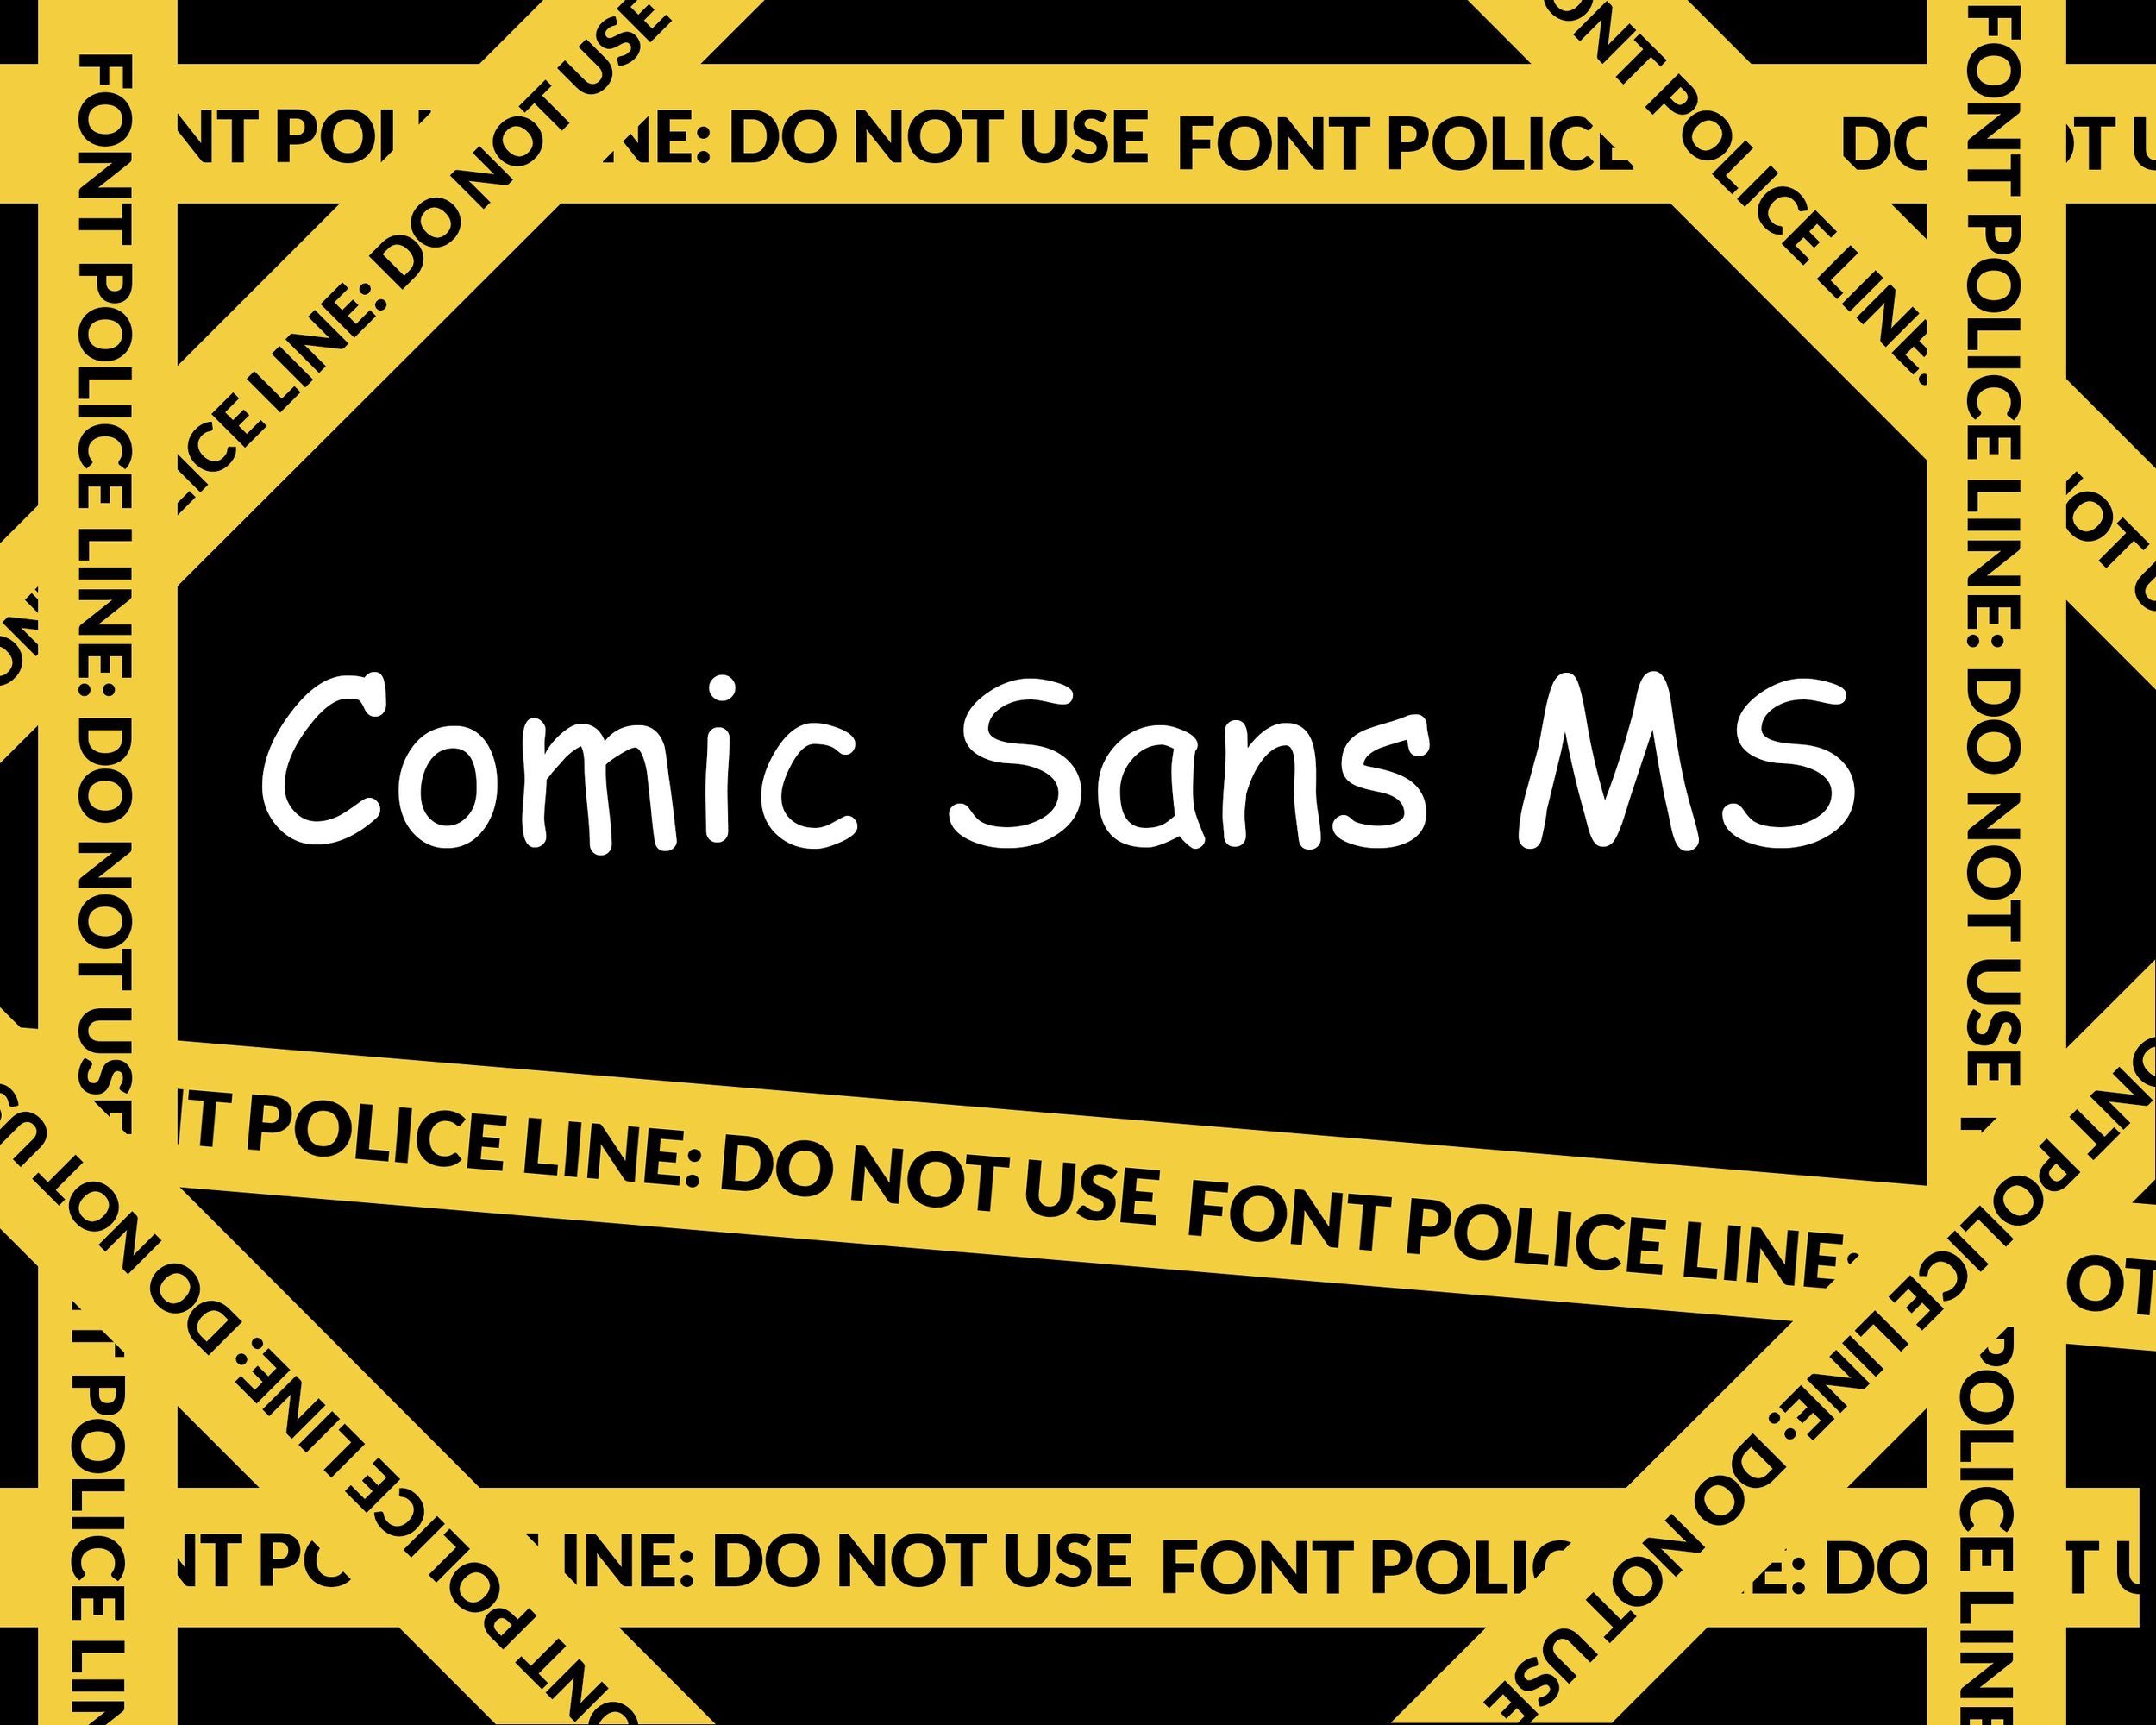 fonts-that-you-should-never-use01.jpg